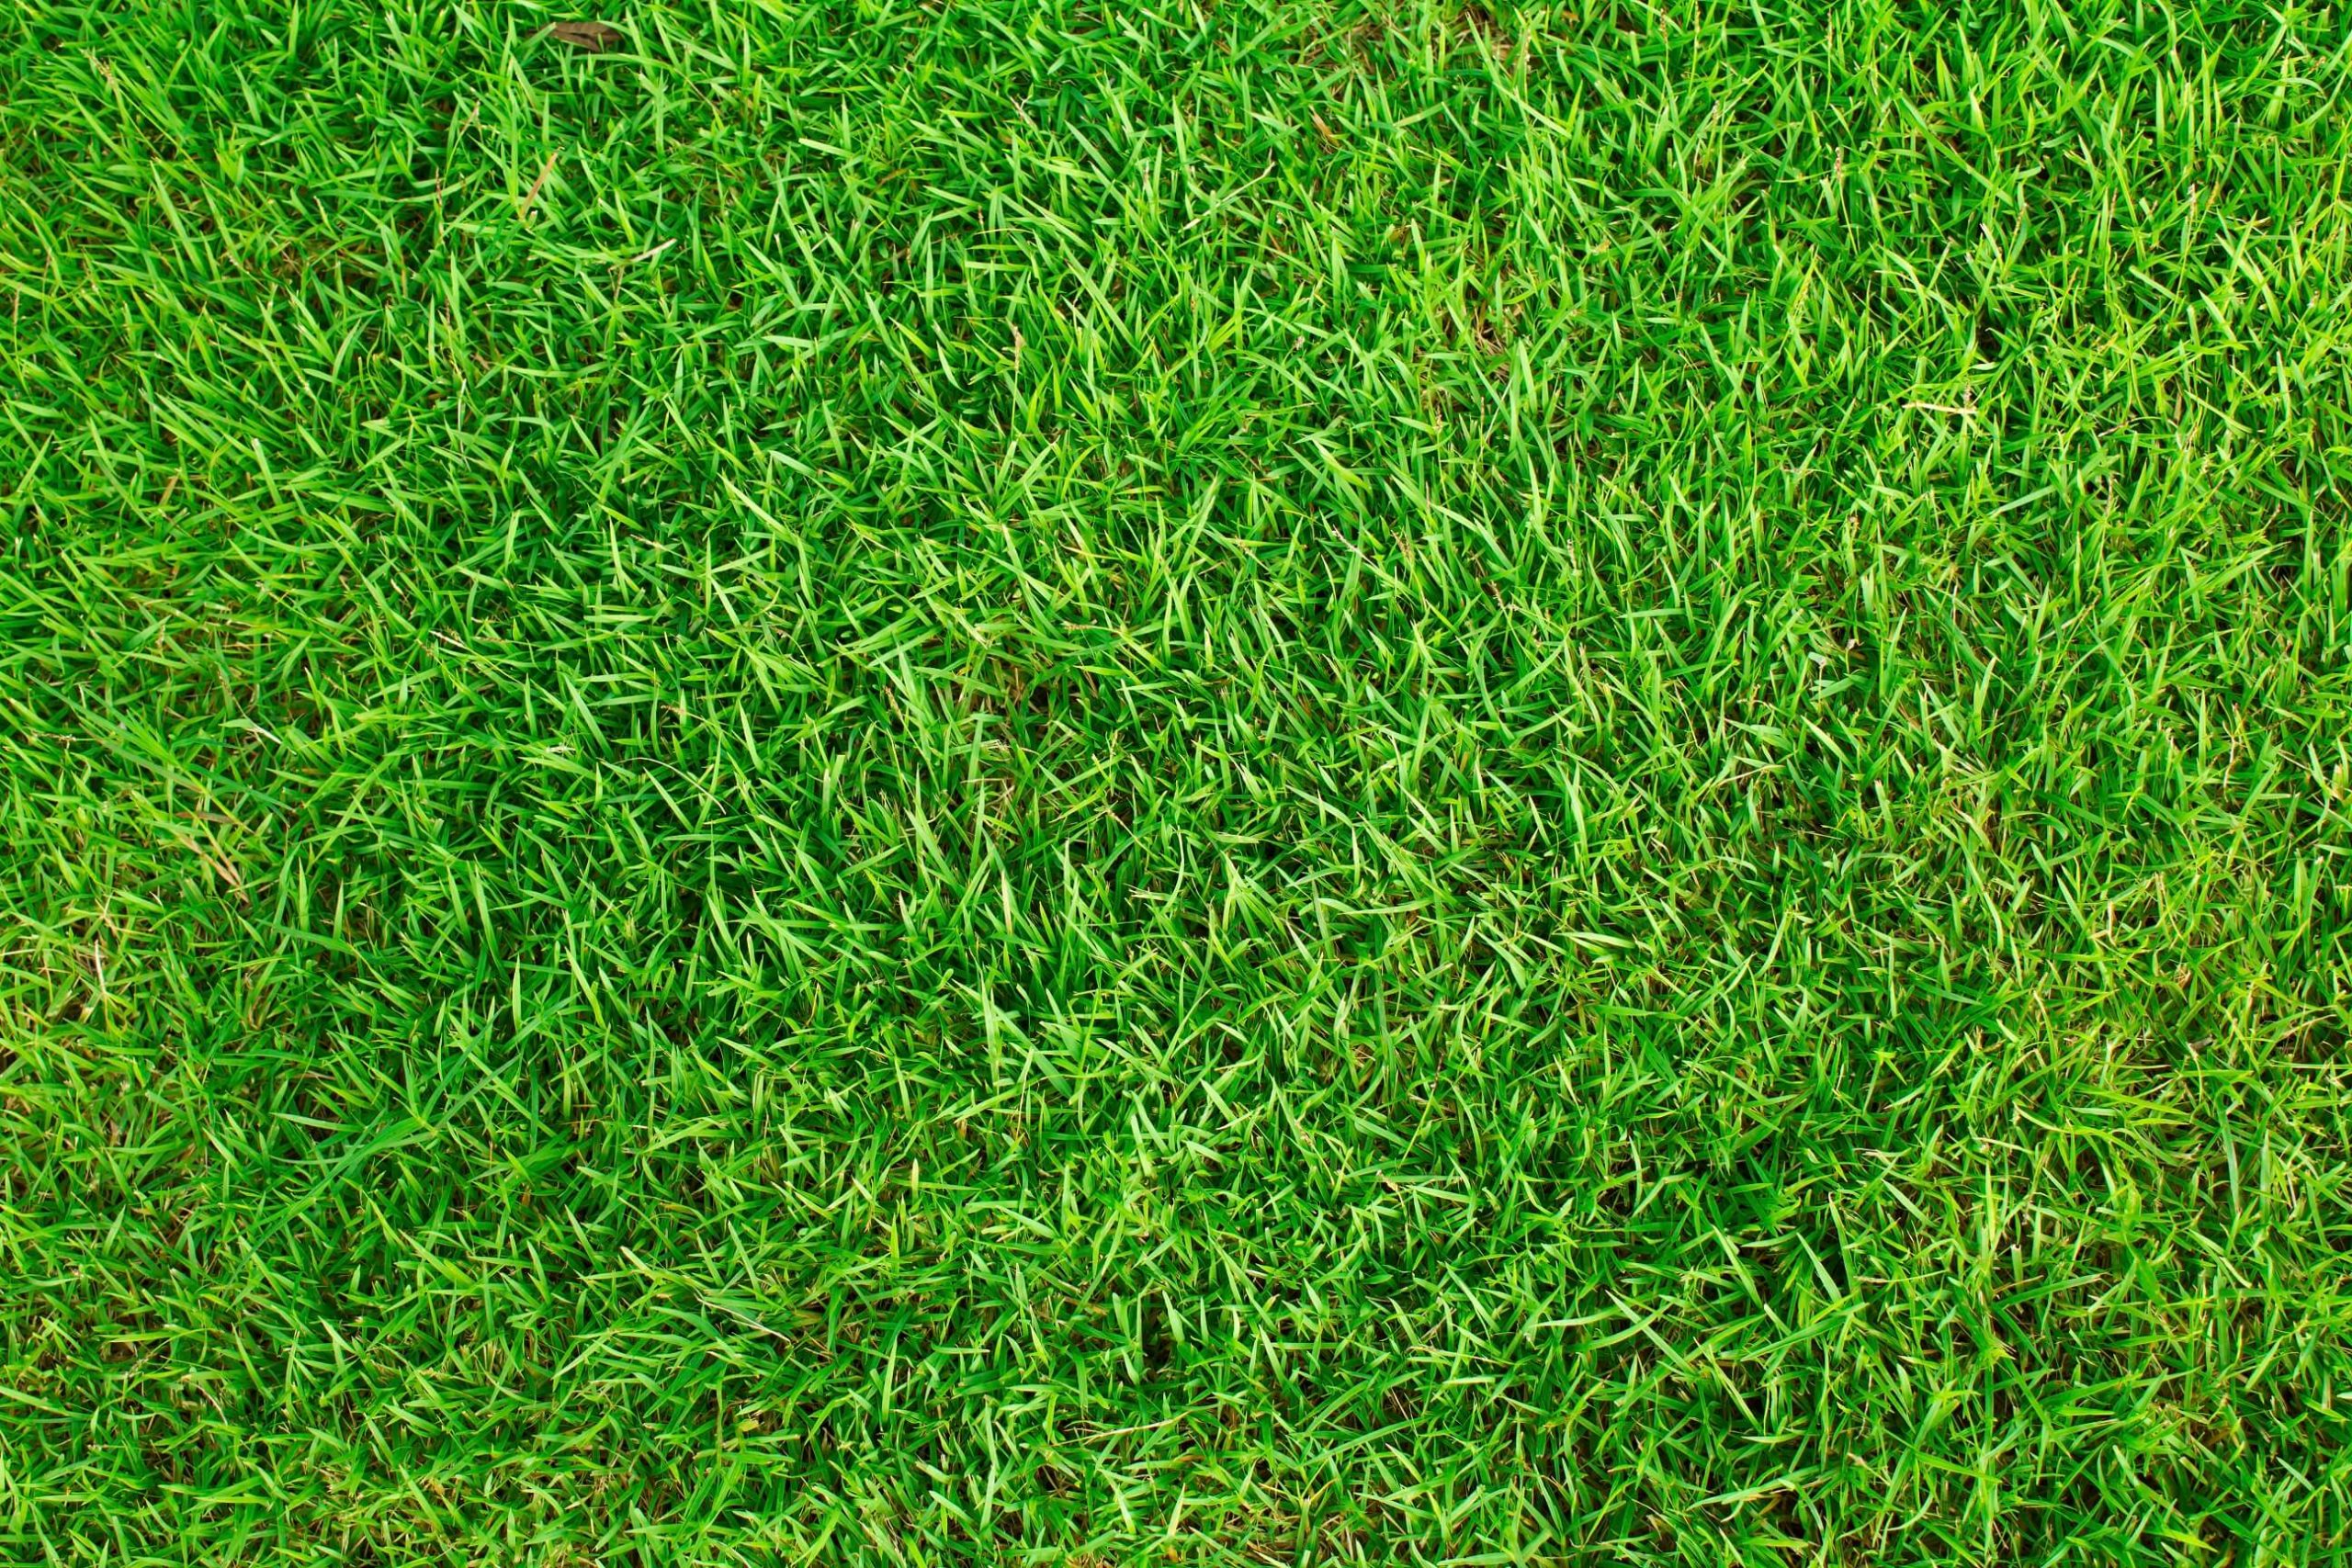 A close-up of a green lawn